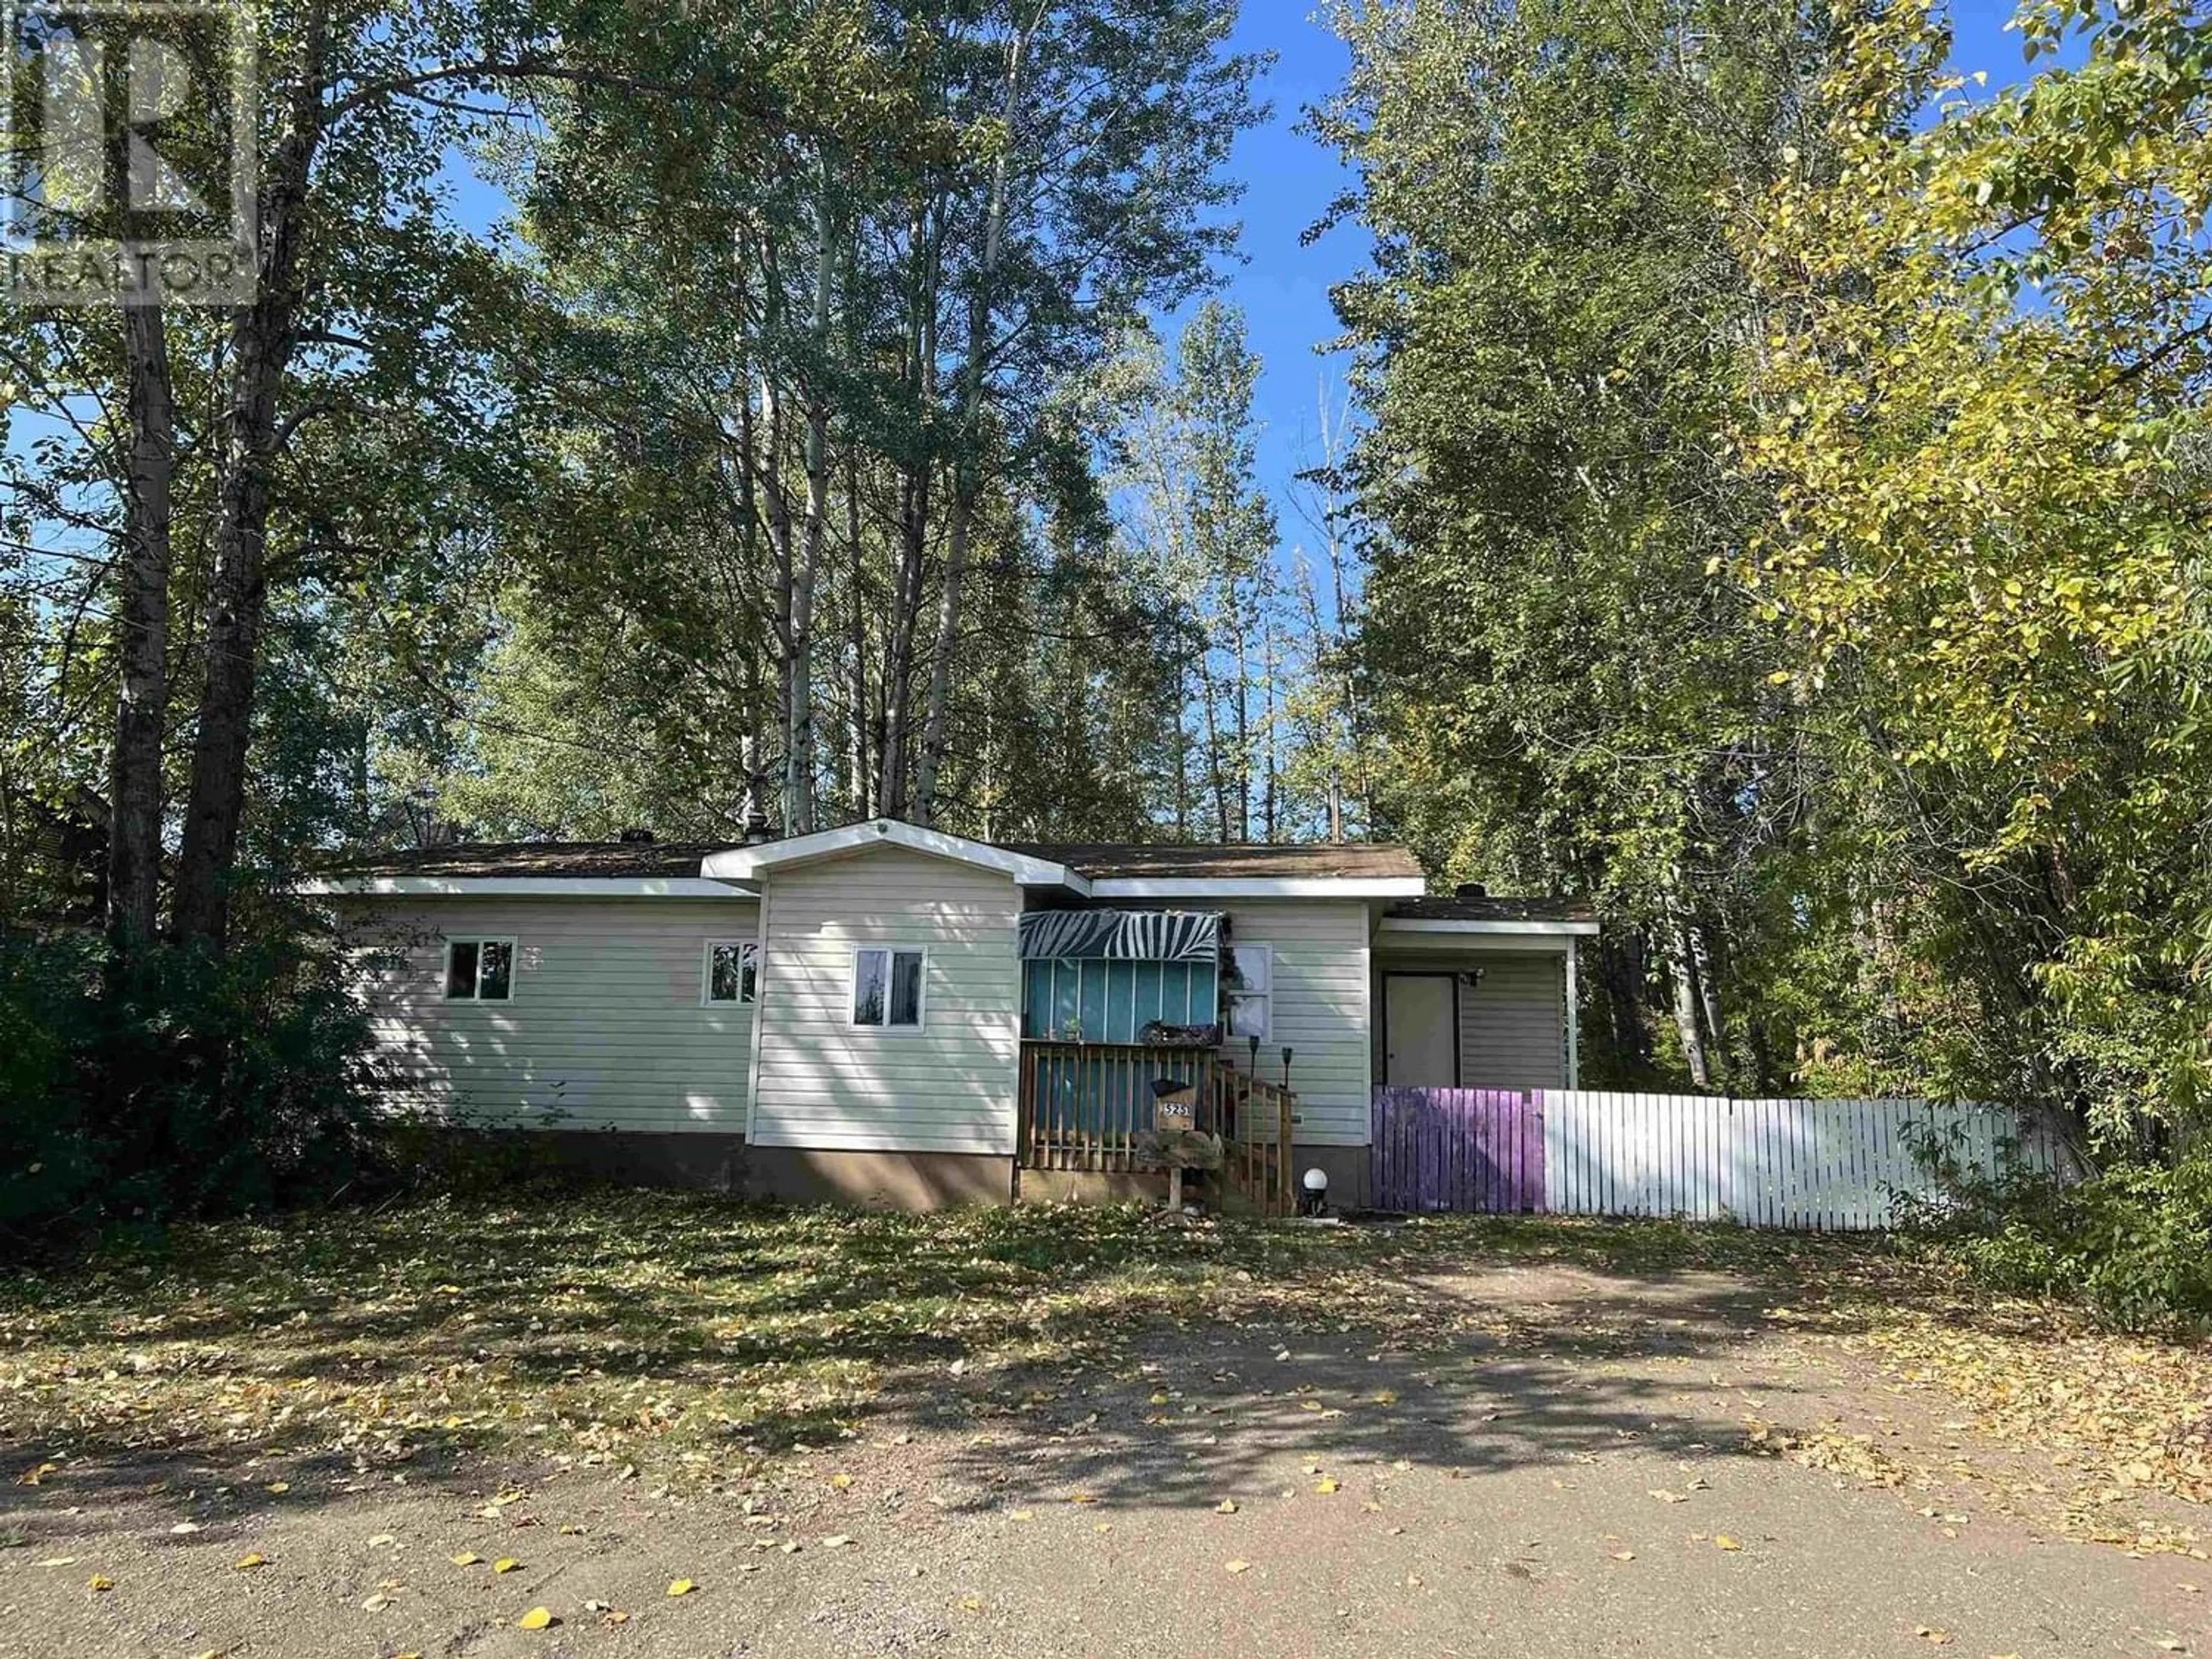 Frontside or backside of a home for 5251 42 STREET, Fort Nelson British Columbia V0C1R0